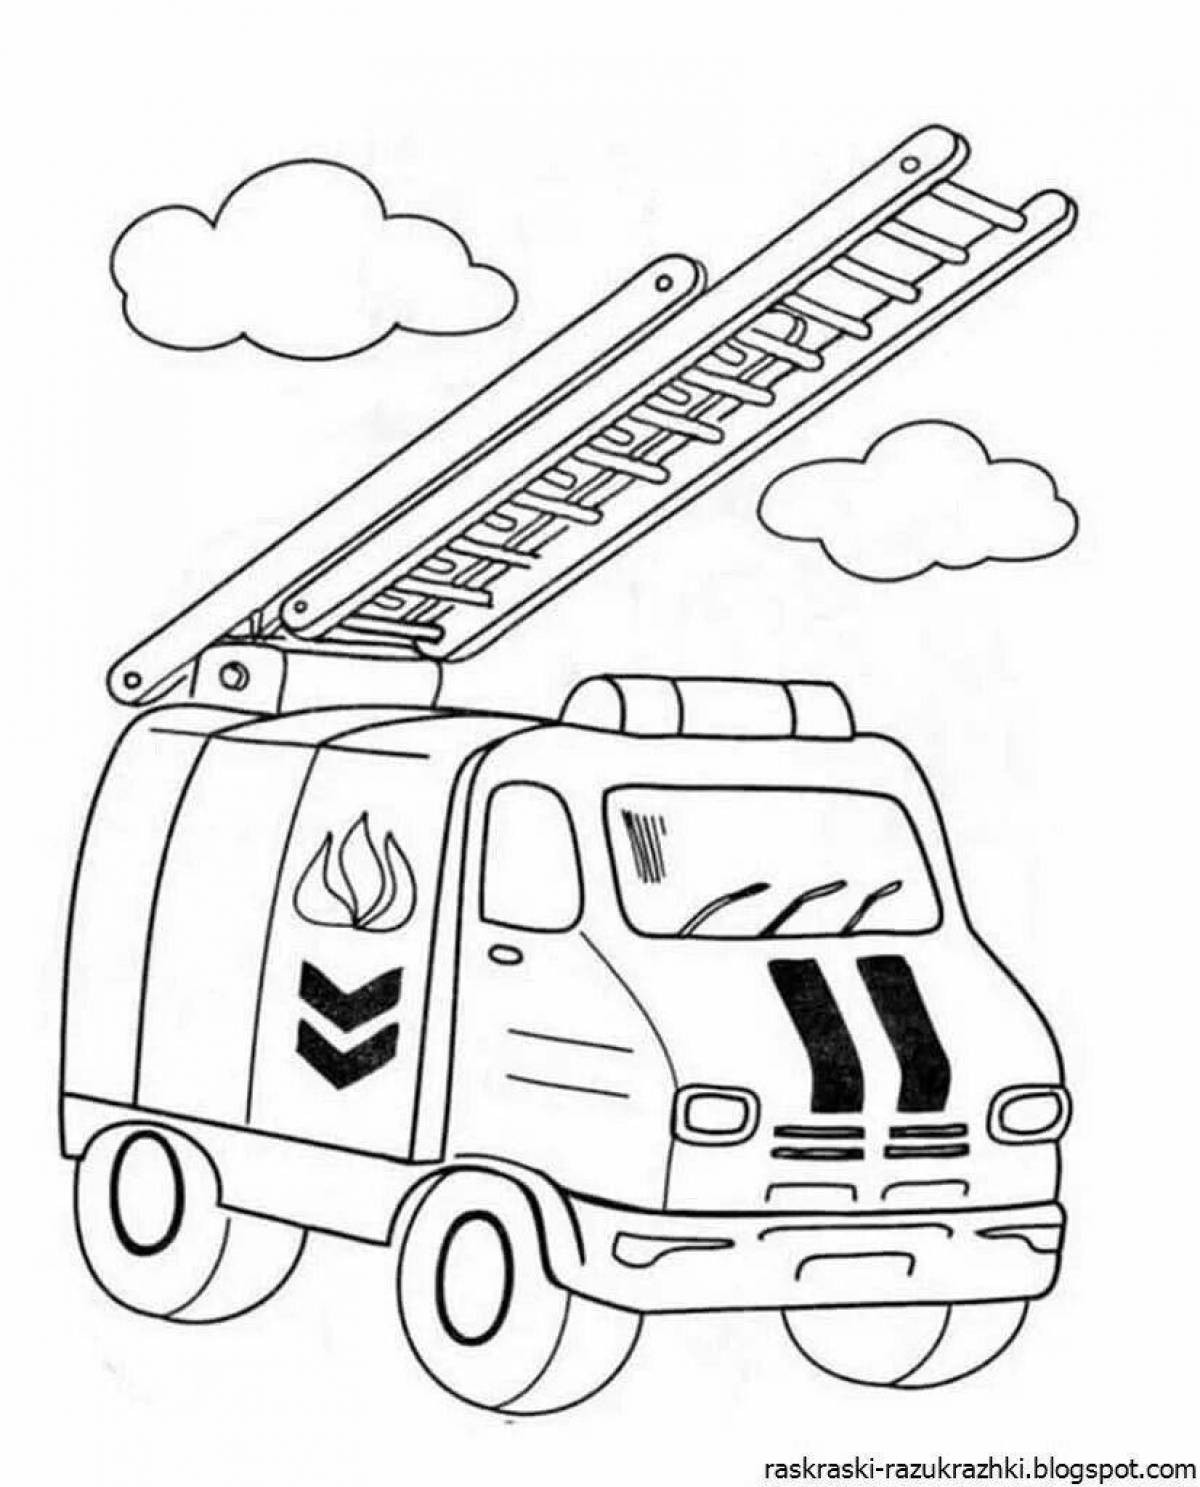 Animated fire truck coloring page for boys